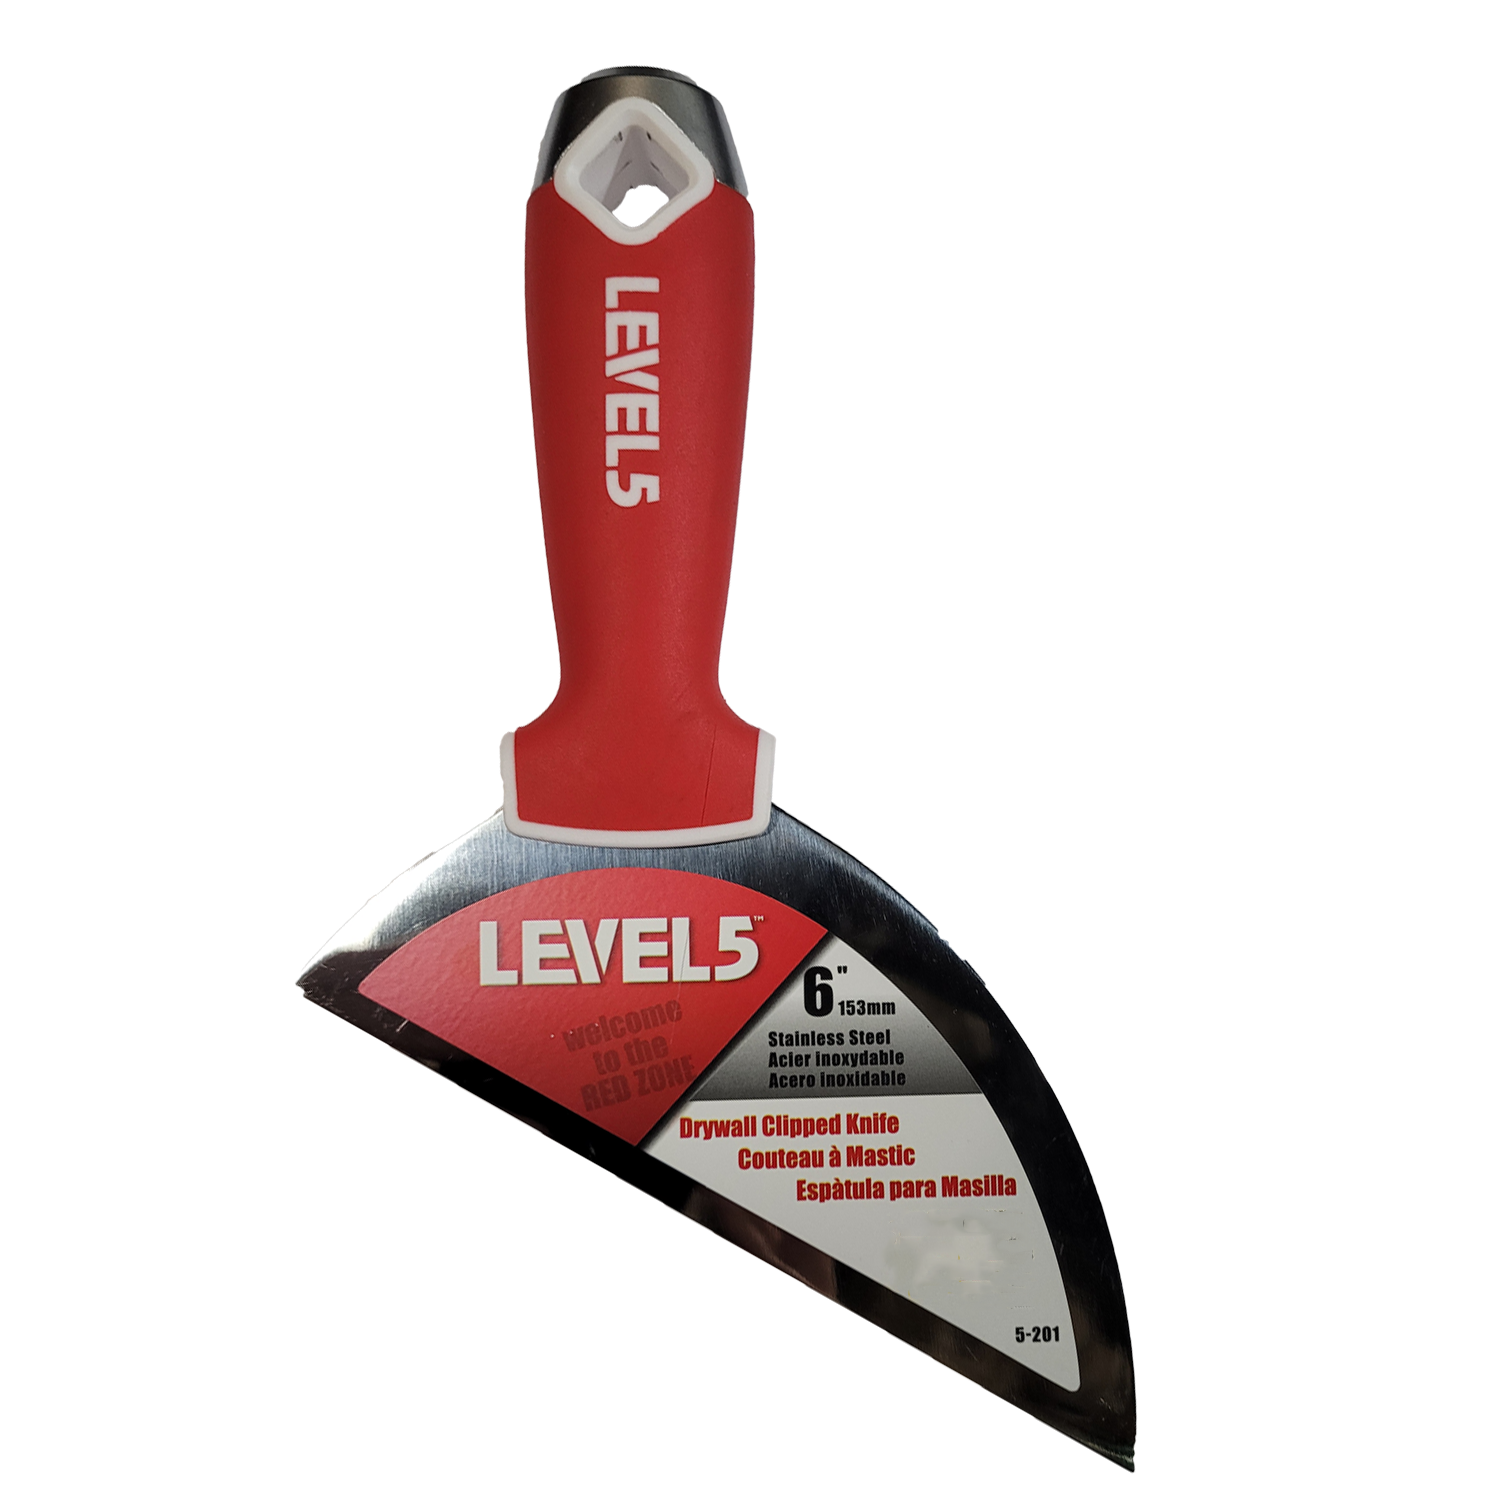 Level 5 6" Stainless Steel Clipped Drywall Joint Knife